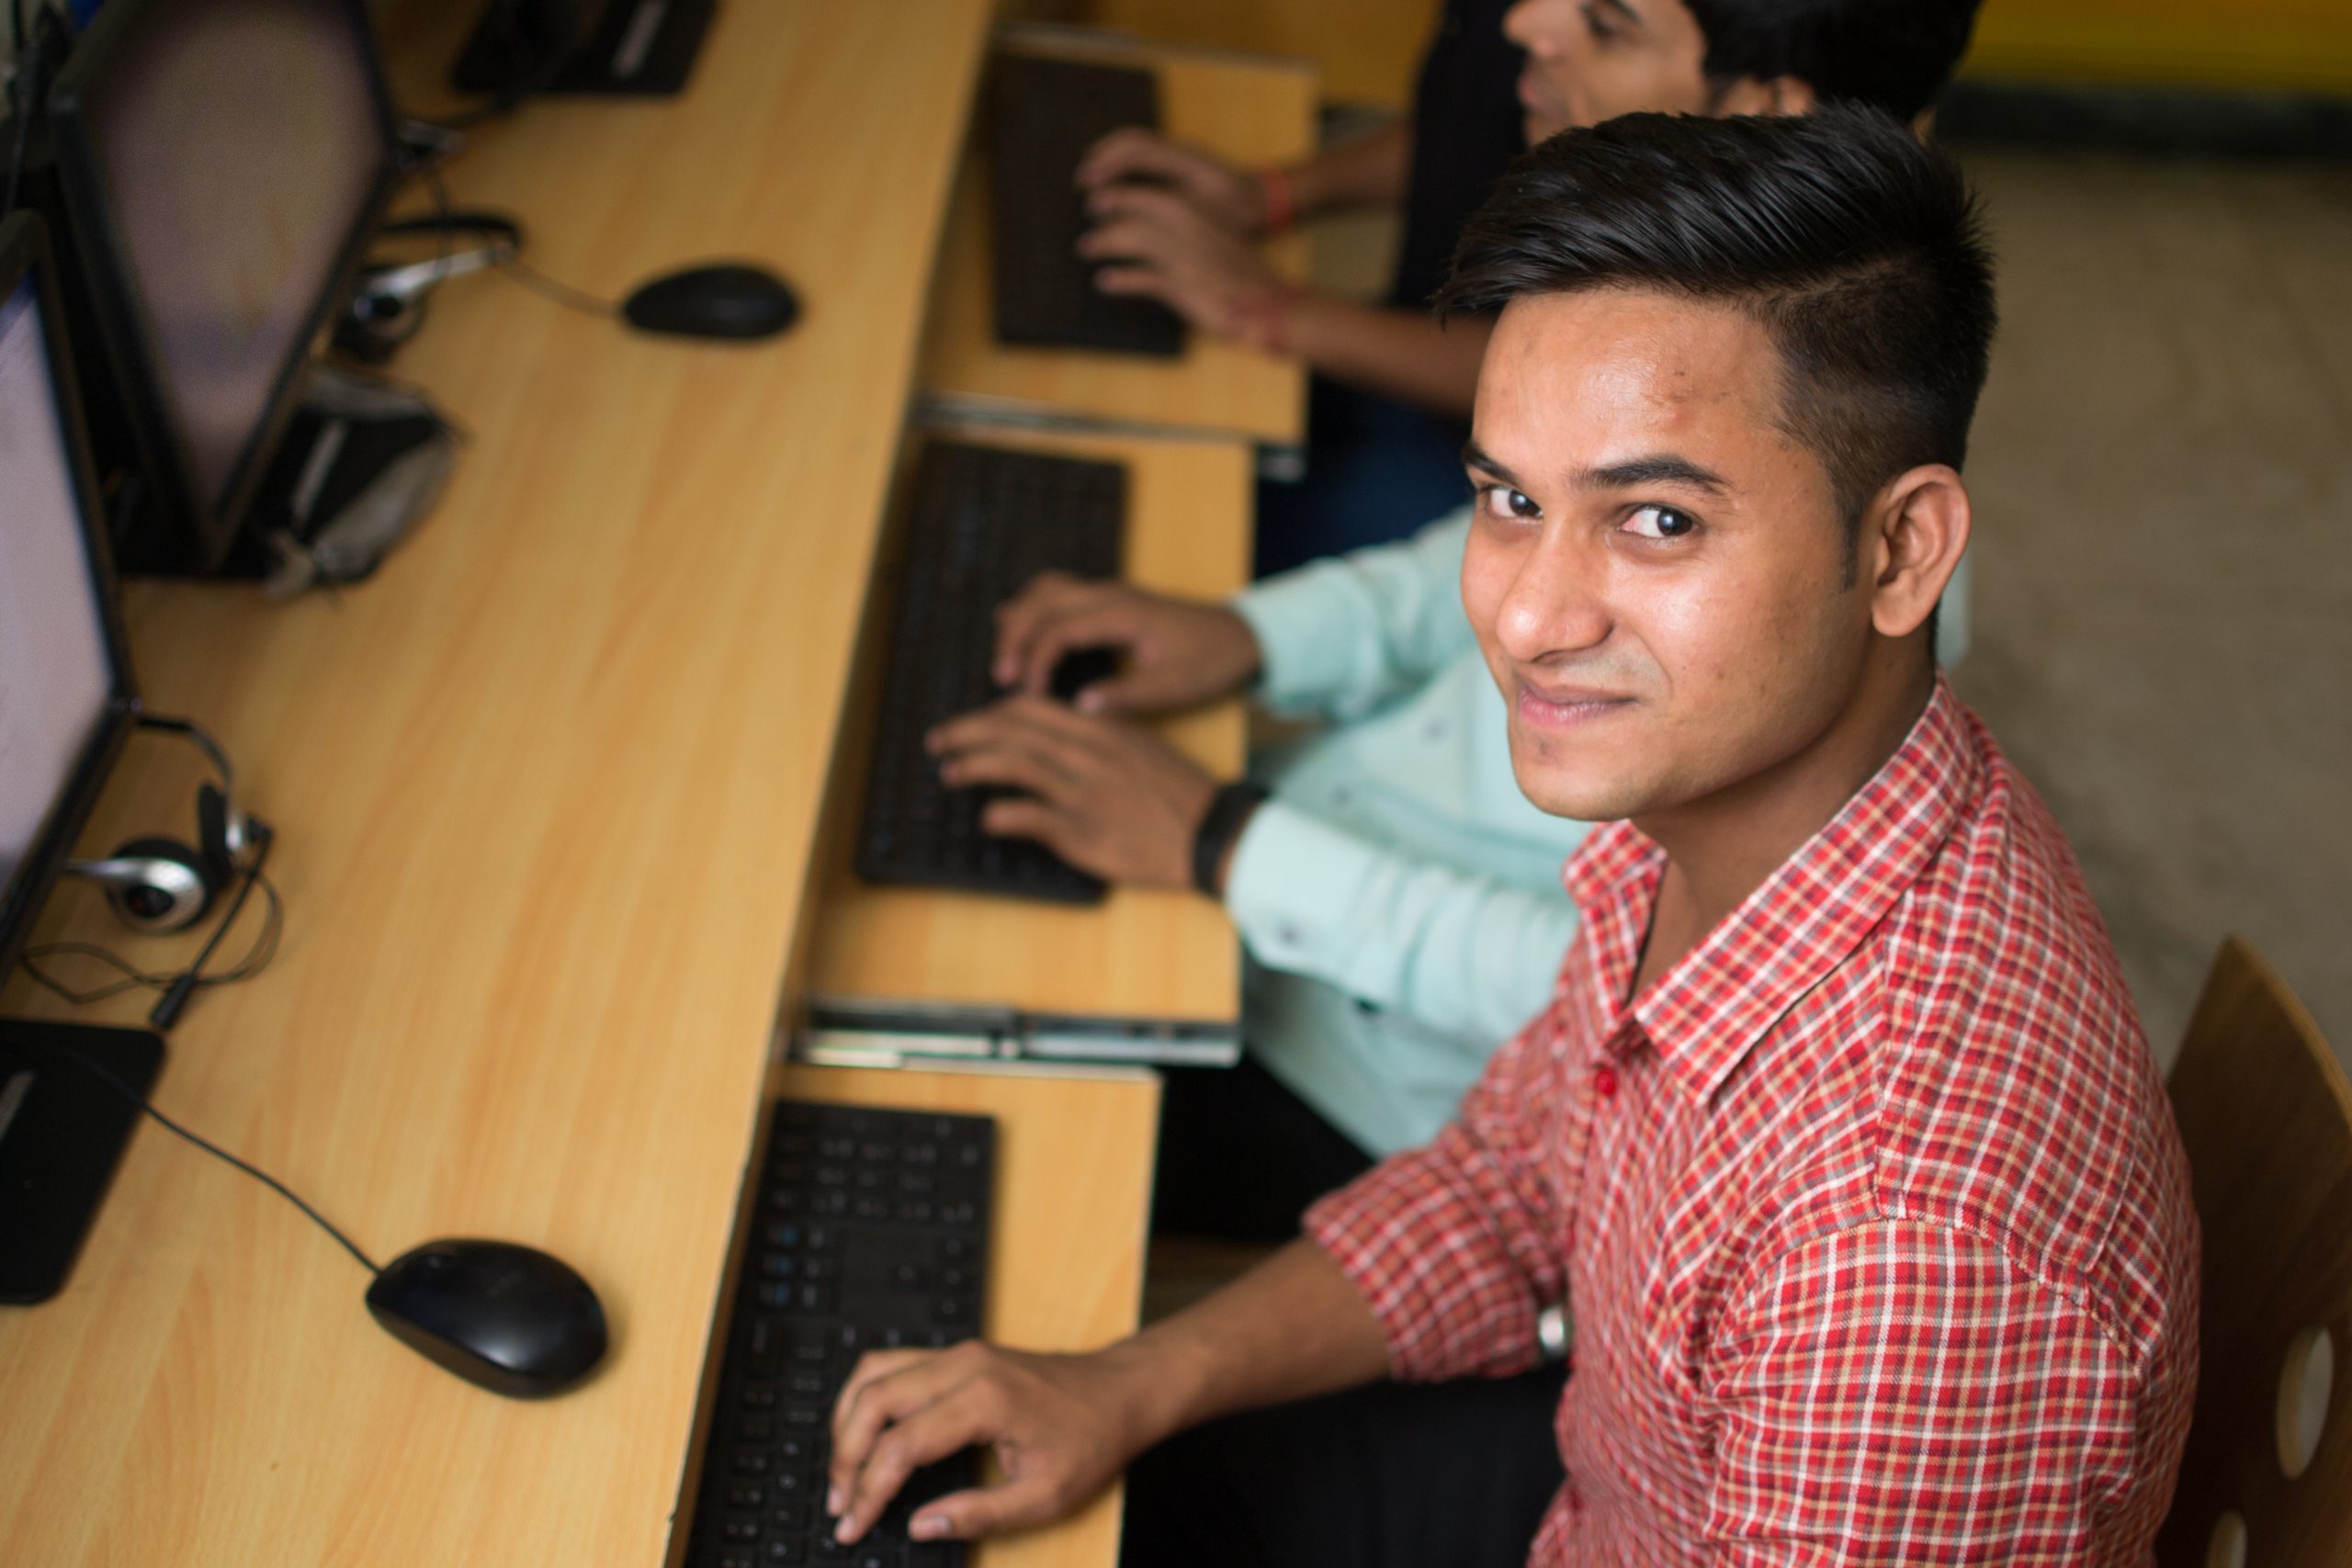 Young boy in checked shirt, sitting at computer, looks up into the camera. Employability training should focus on skilling the youth